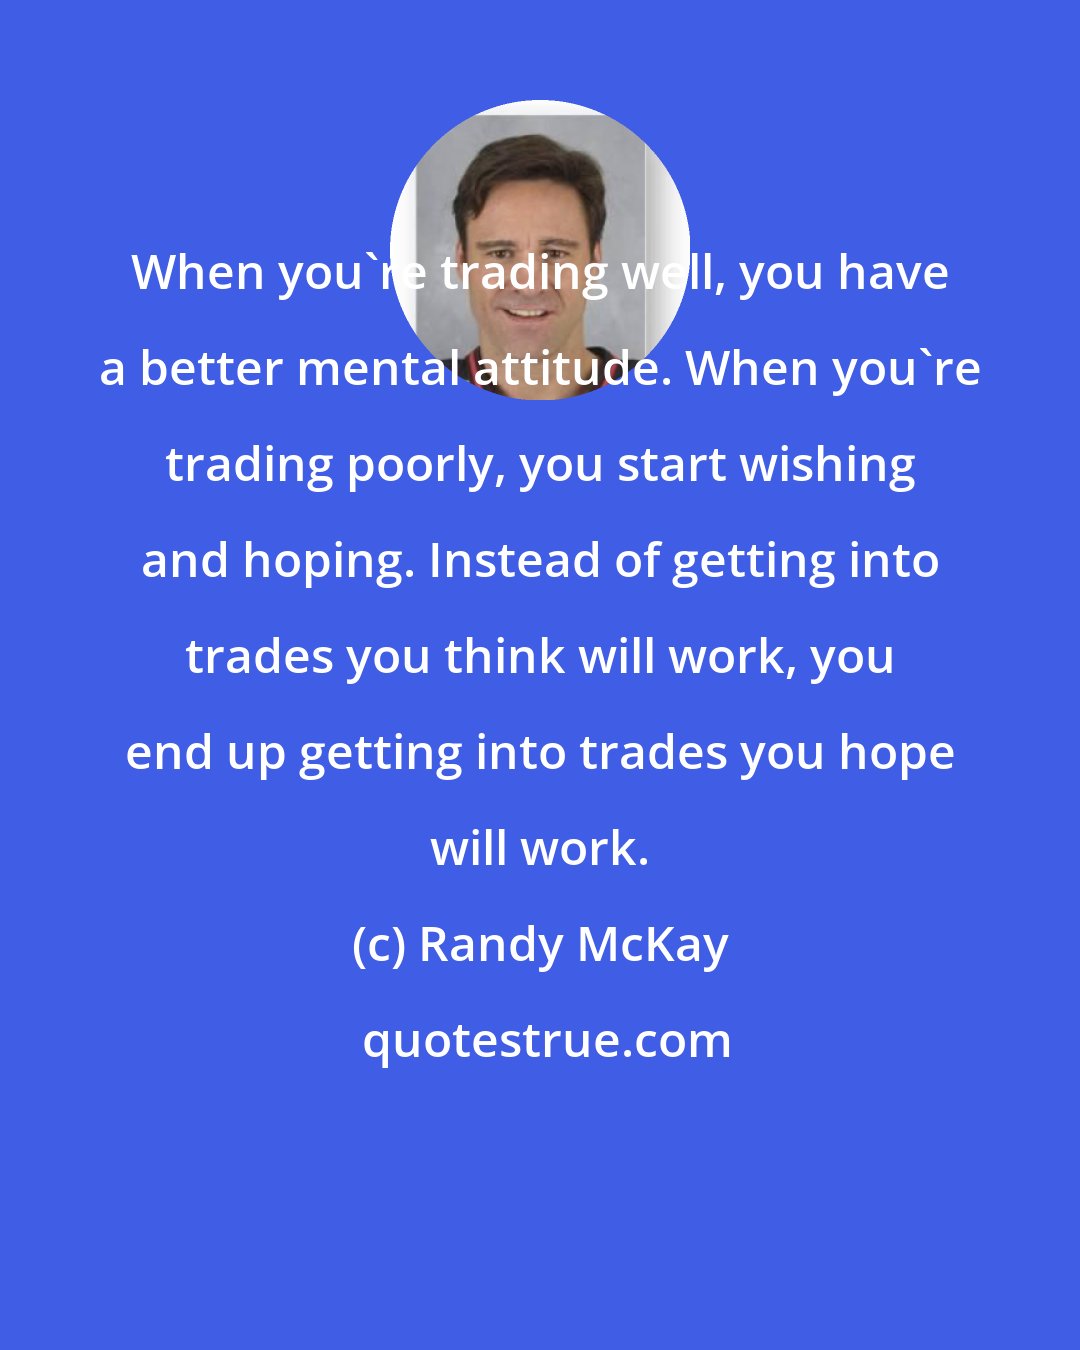 Randy McKay: When you're trading well, you have a better mental attitude. When you're trading poorly, you start wishing and hoping. Instead of getting into trades you think will work, you end up getting into trades you hope will work.